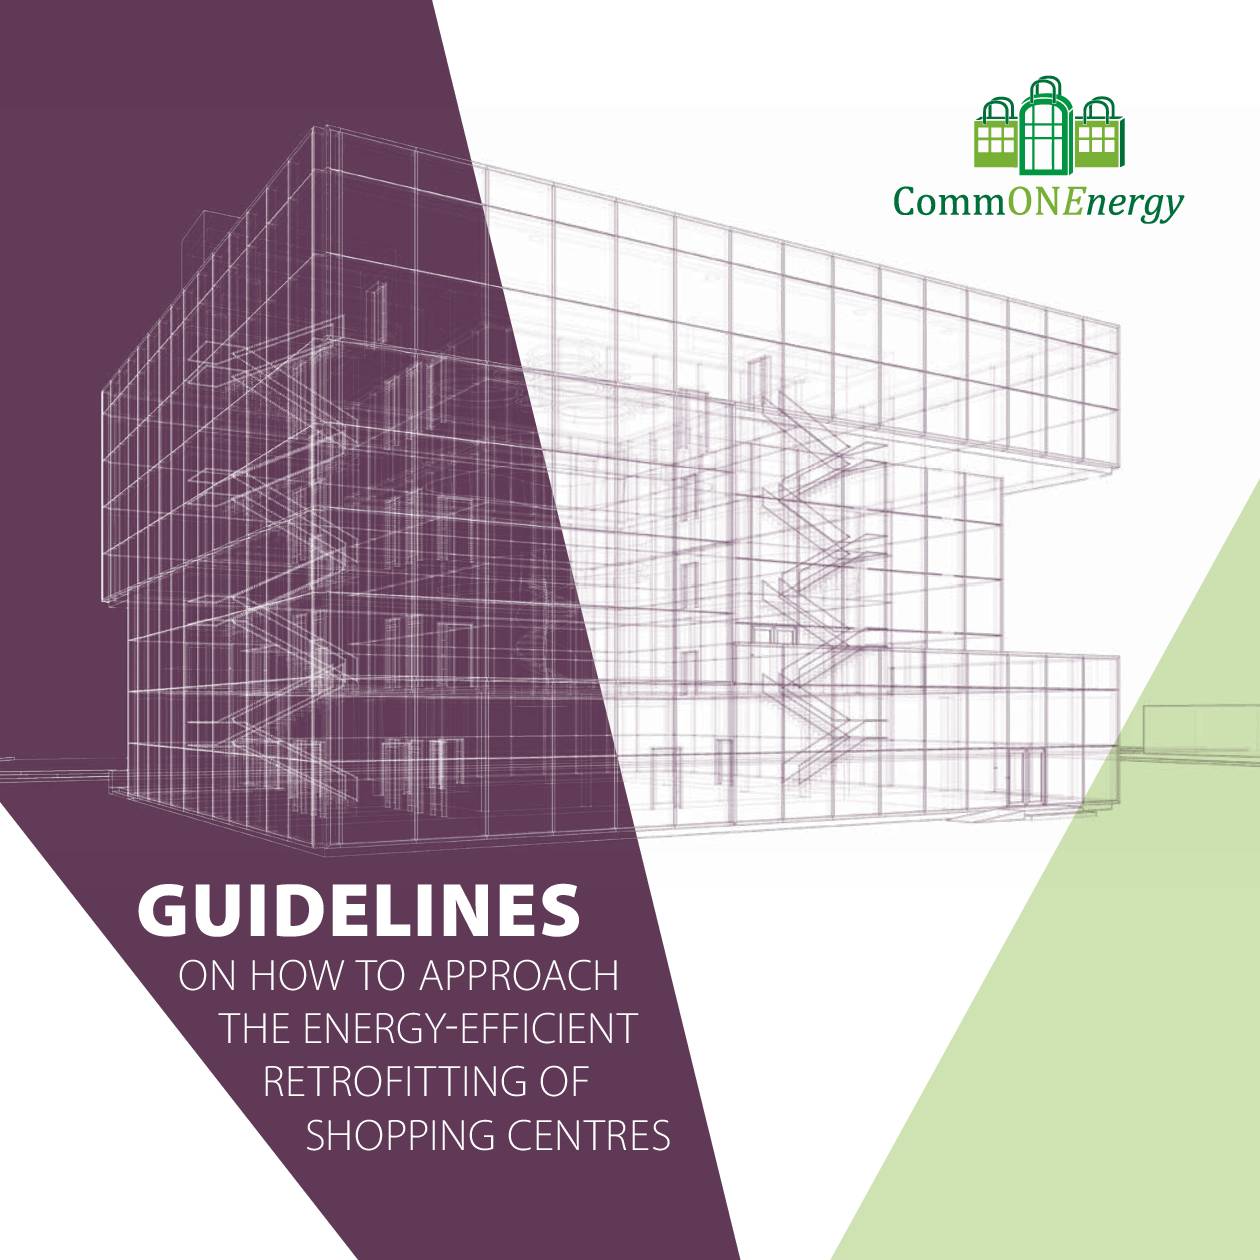 Guidelines on how to approach the energy-efficient renovation of shopping centres: the “how-to” guide on renovating shopping centres